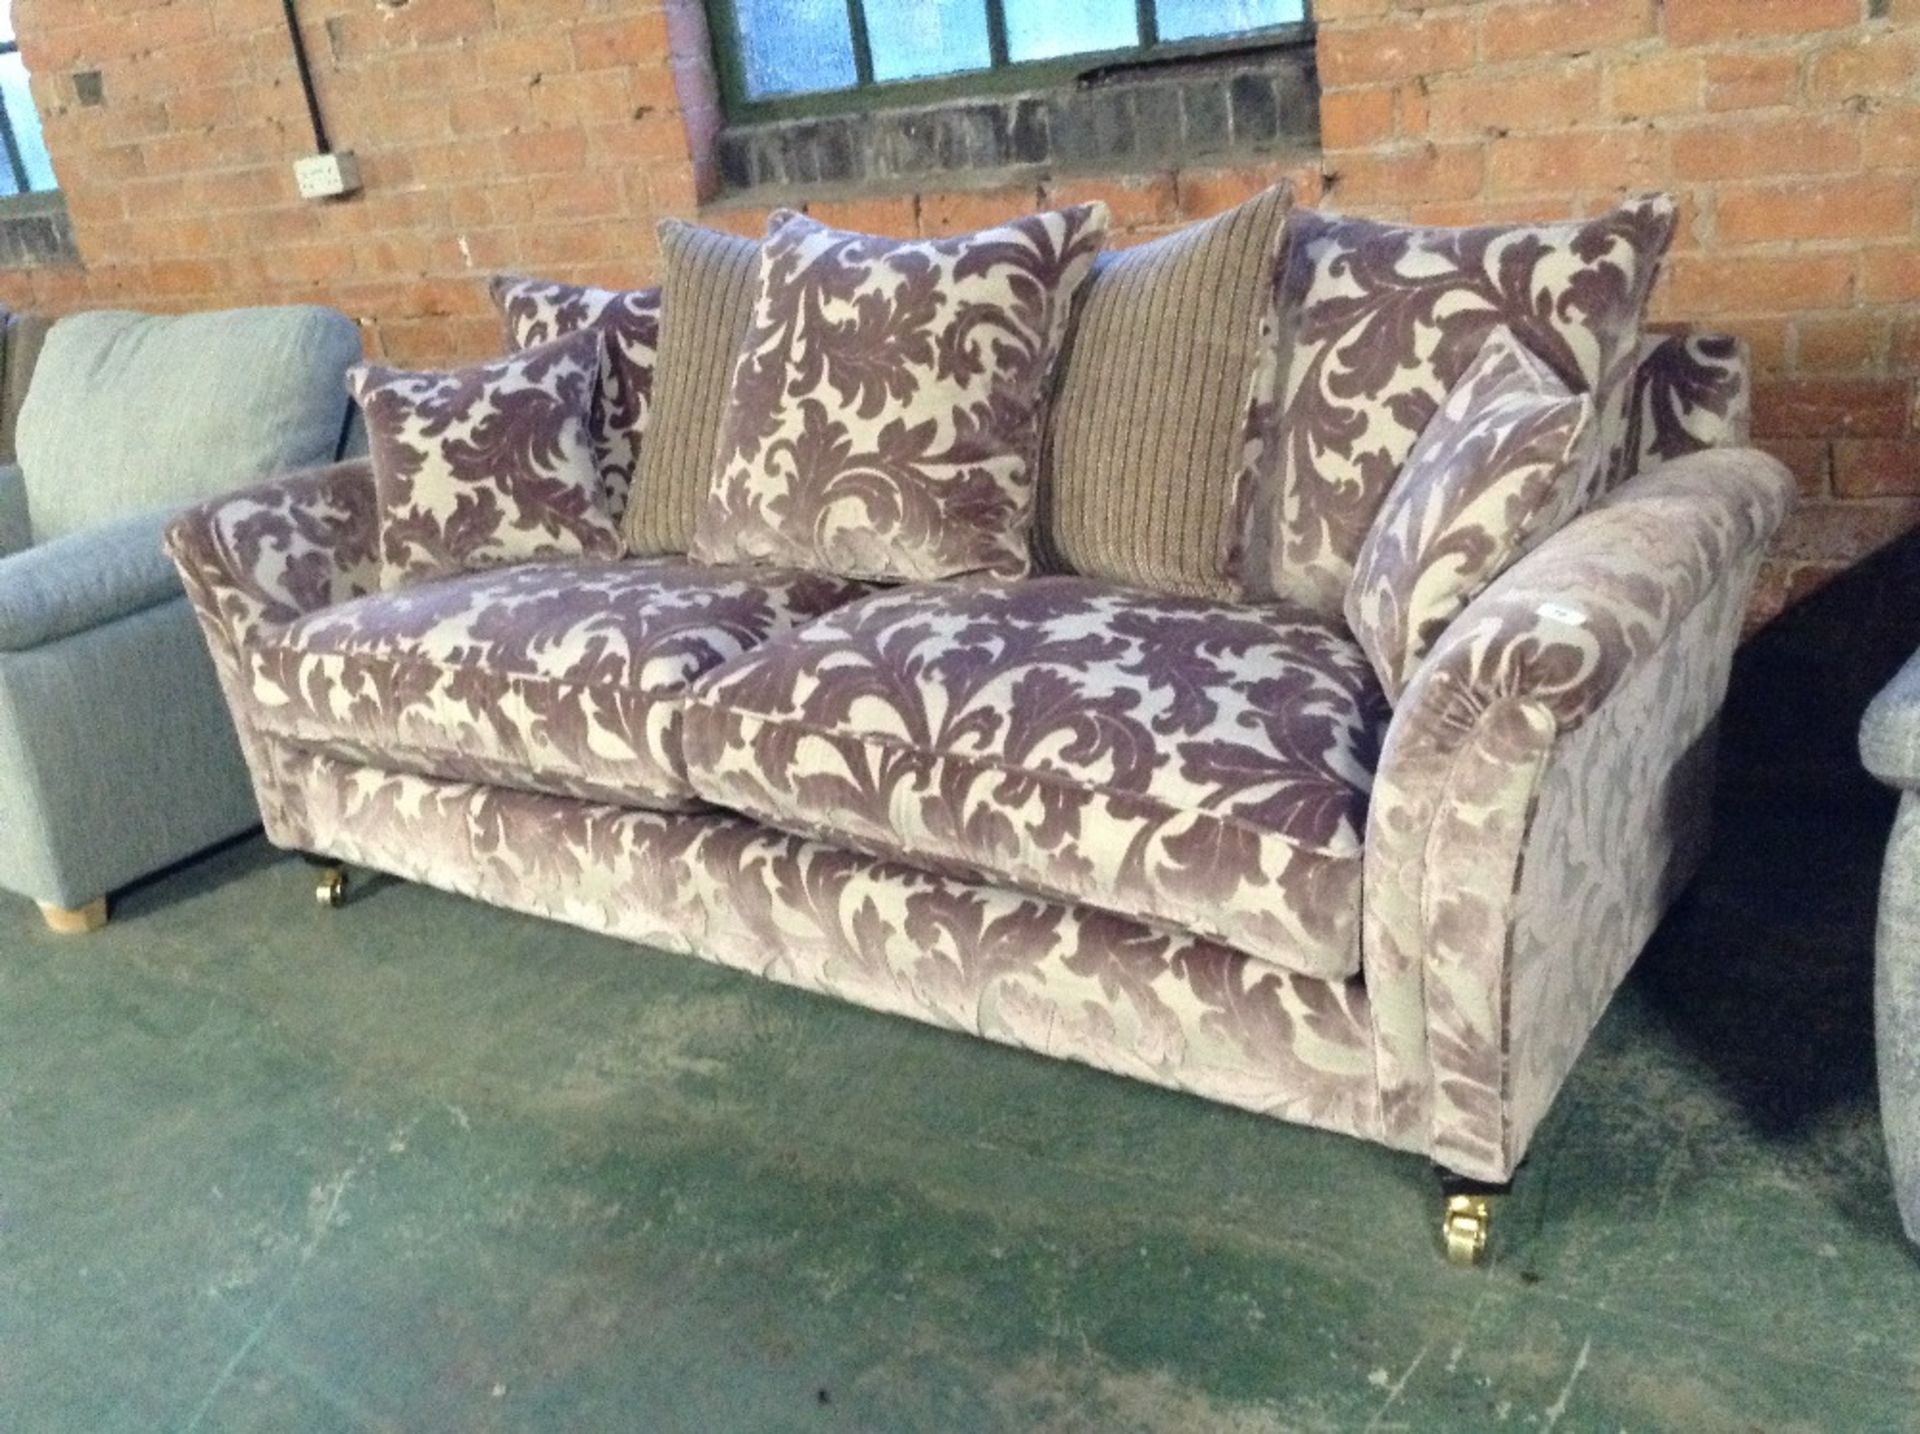 EX SHOWROOM LILAC AND GREY FLORAL PATTERNED 3 SEAT